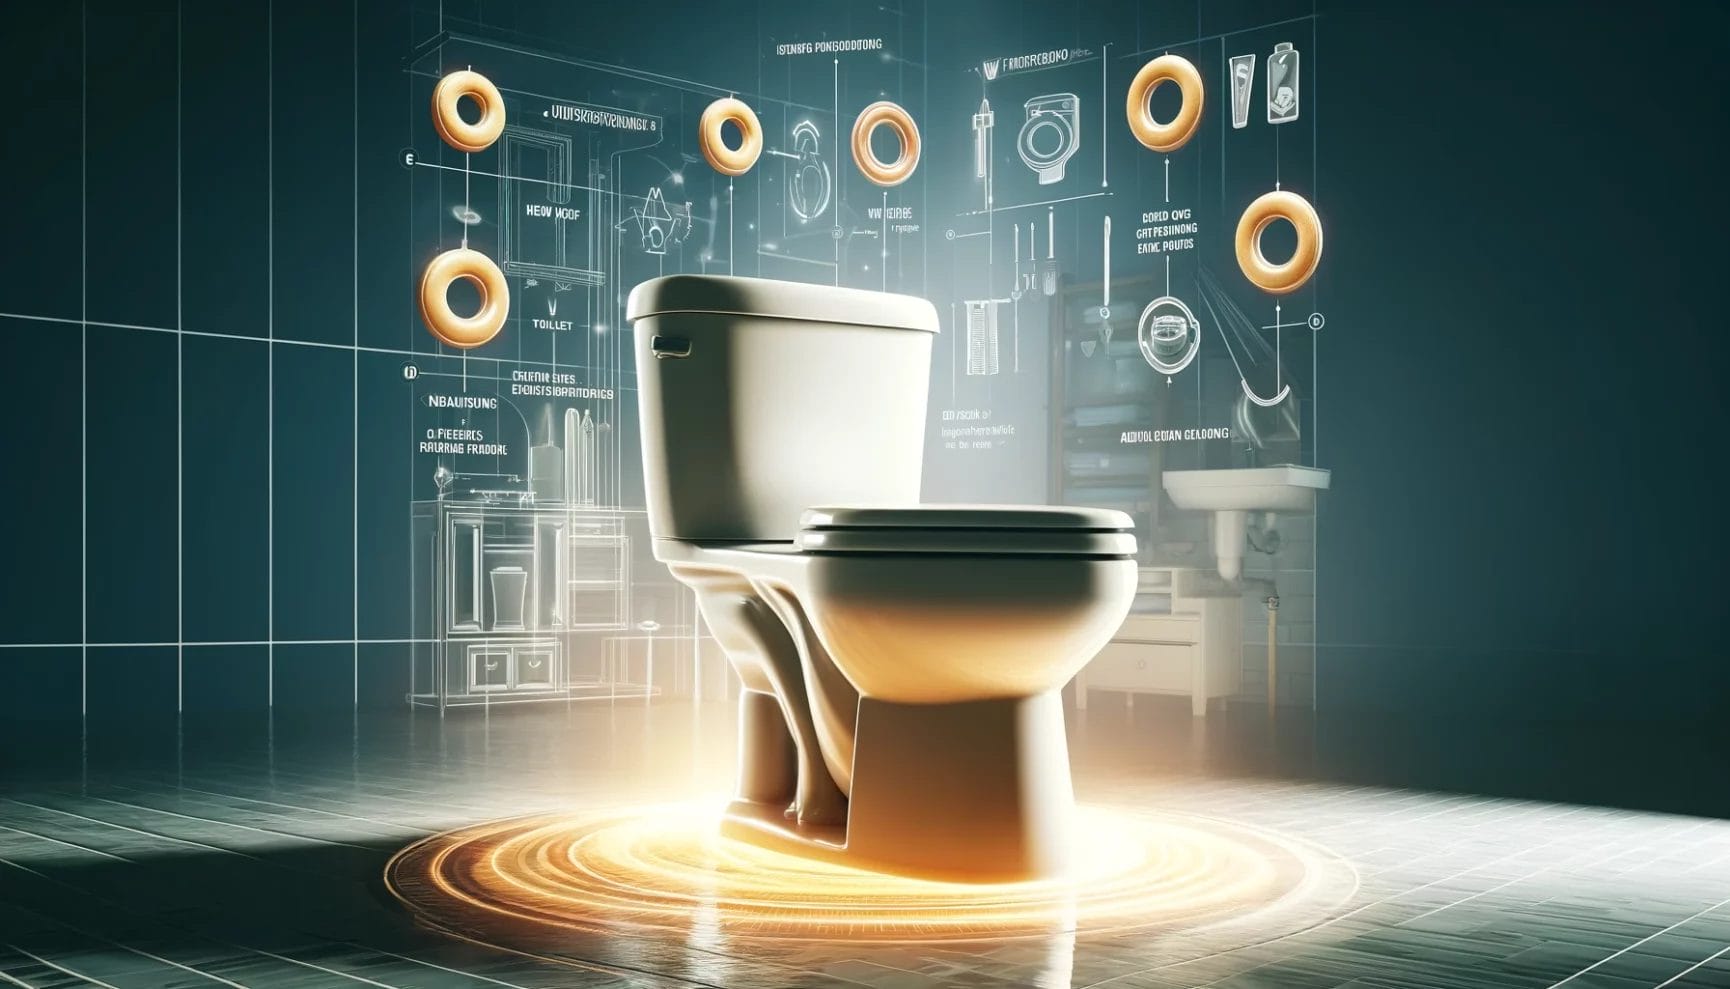 A modern toilet with futuristic holographic interface displaying technical specifications and data.